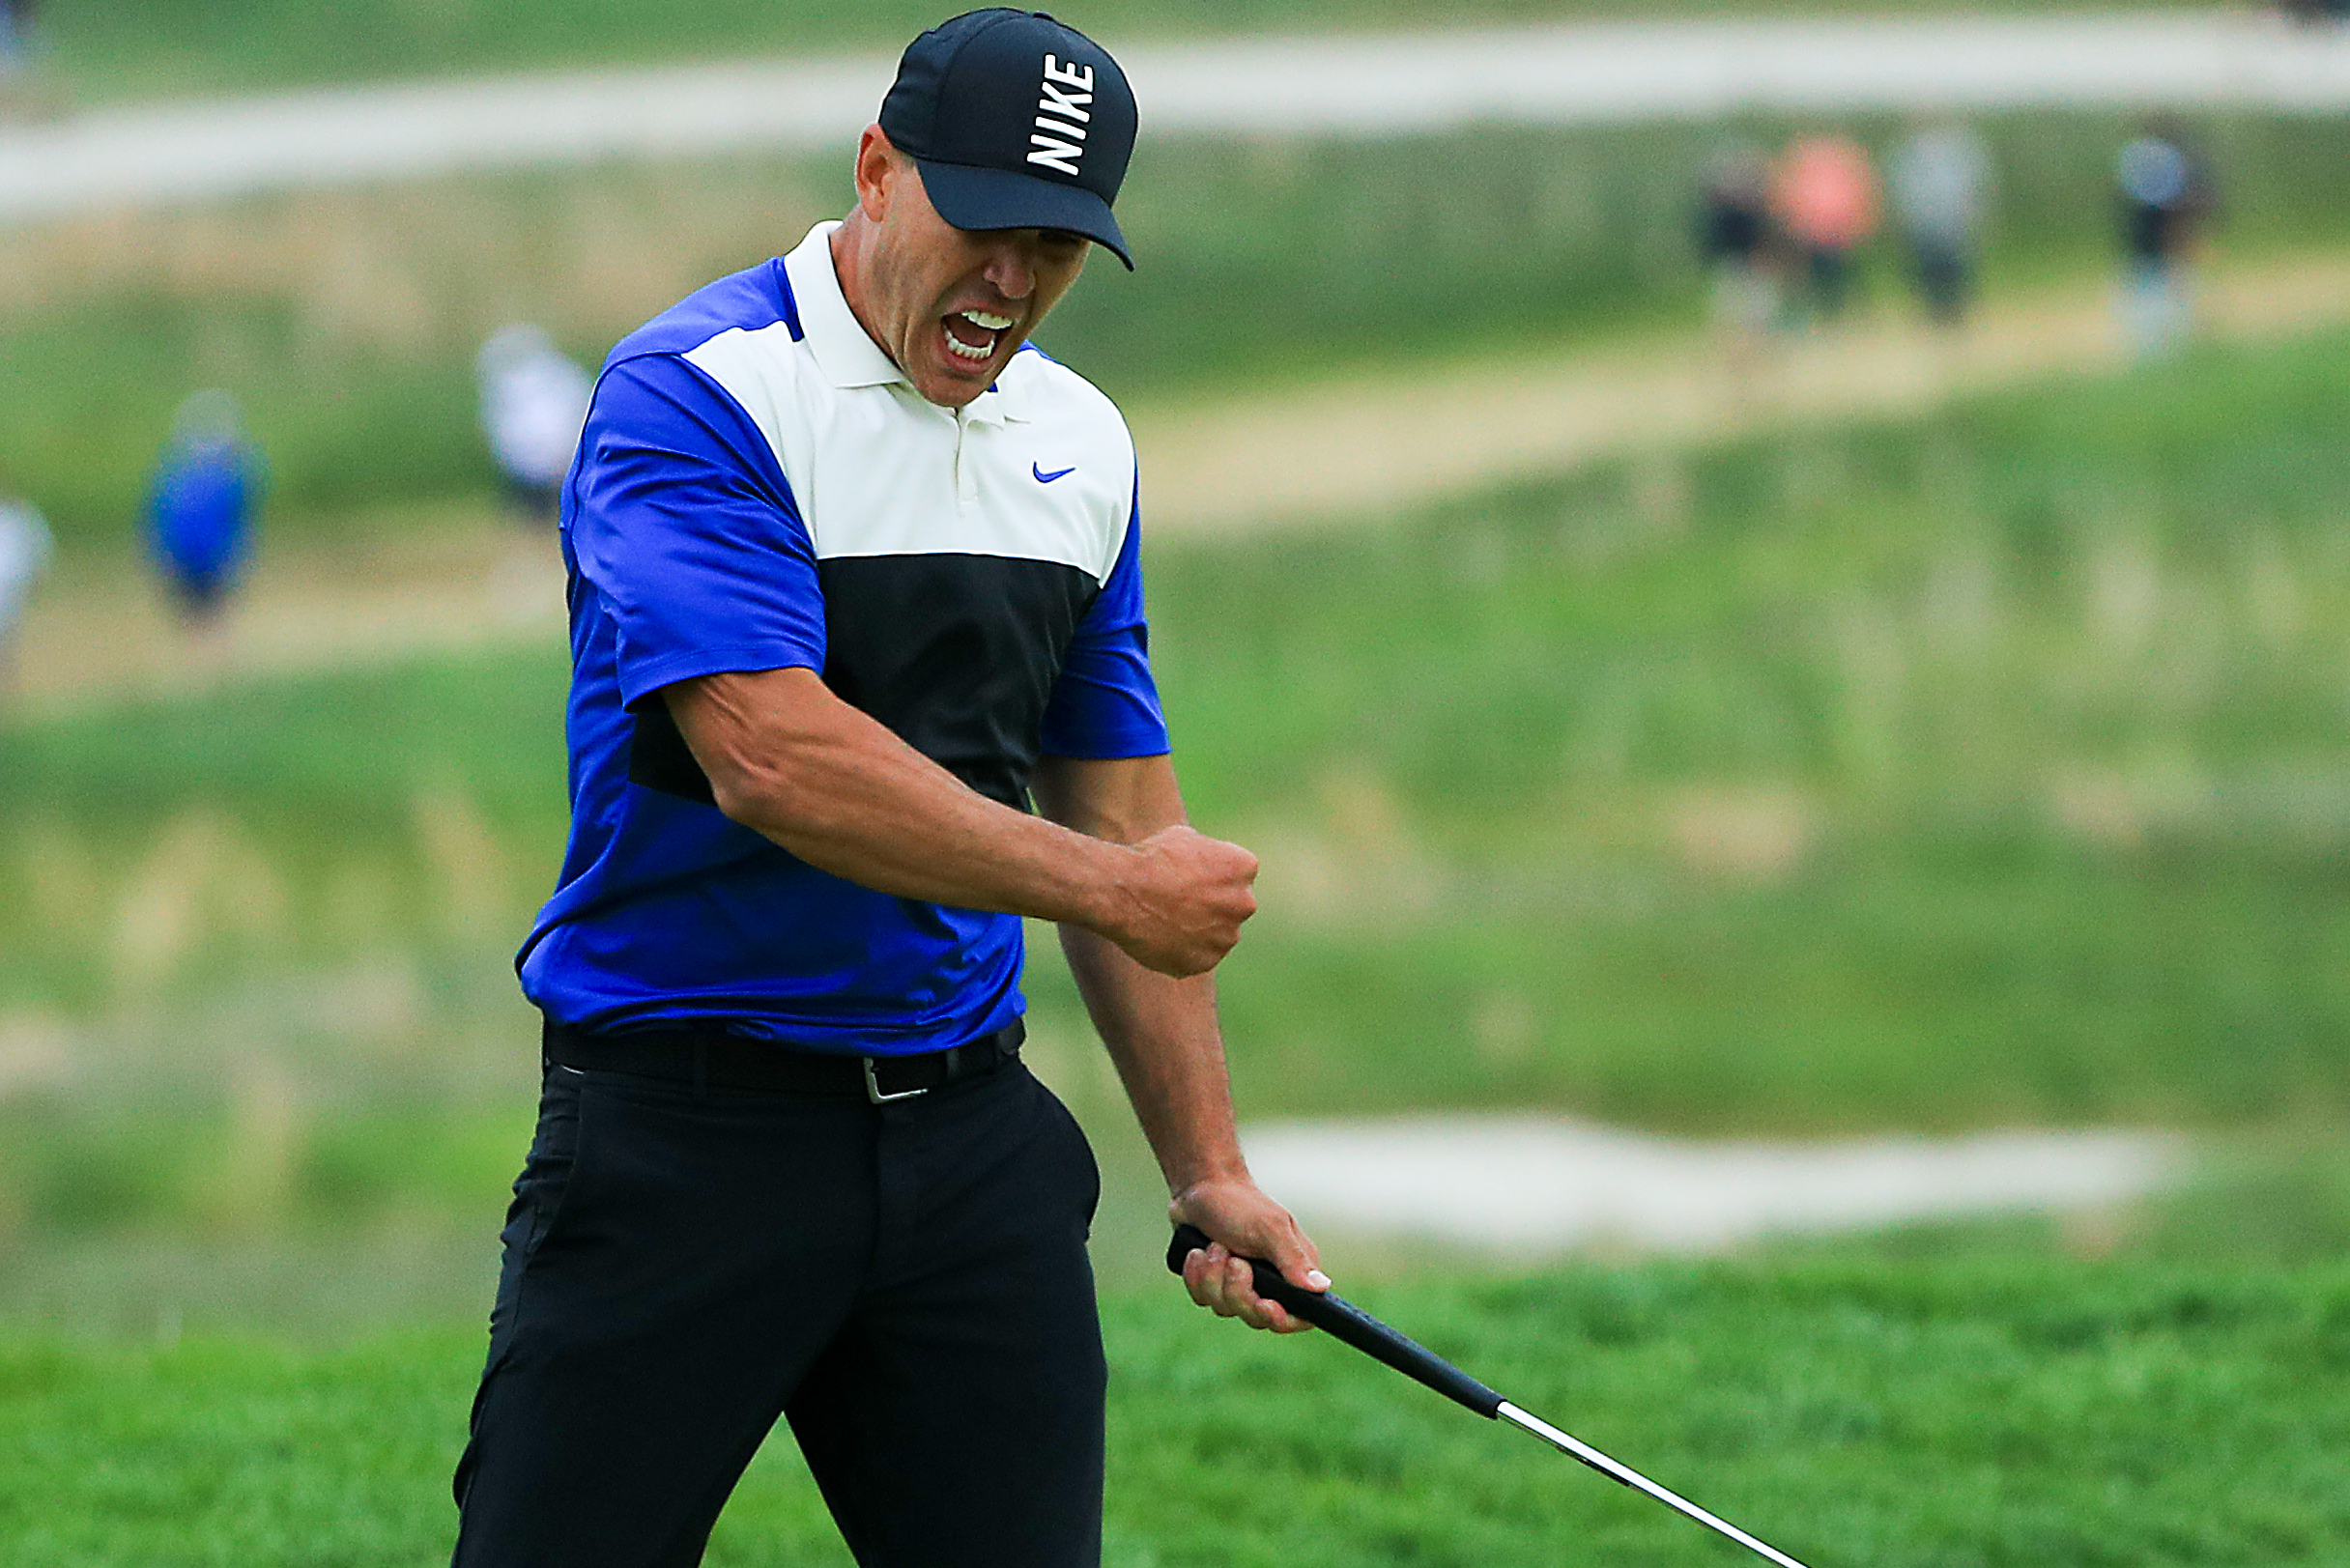 “It is what it is” – Brooks Koepka’s Mental Game that has captured Five Majors and counting